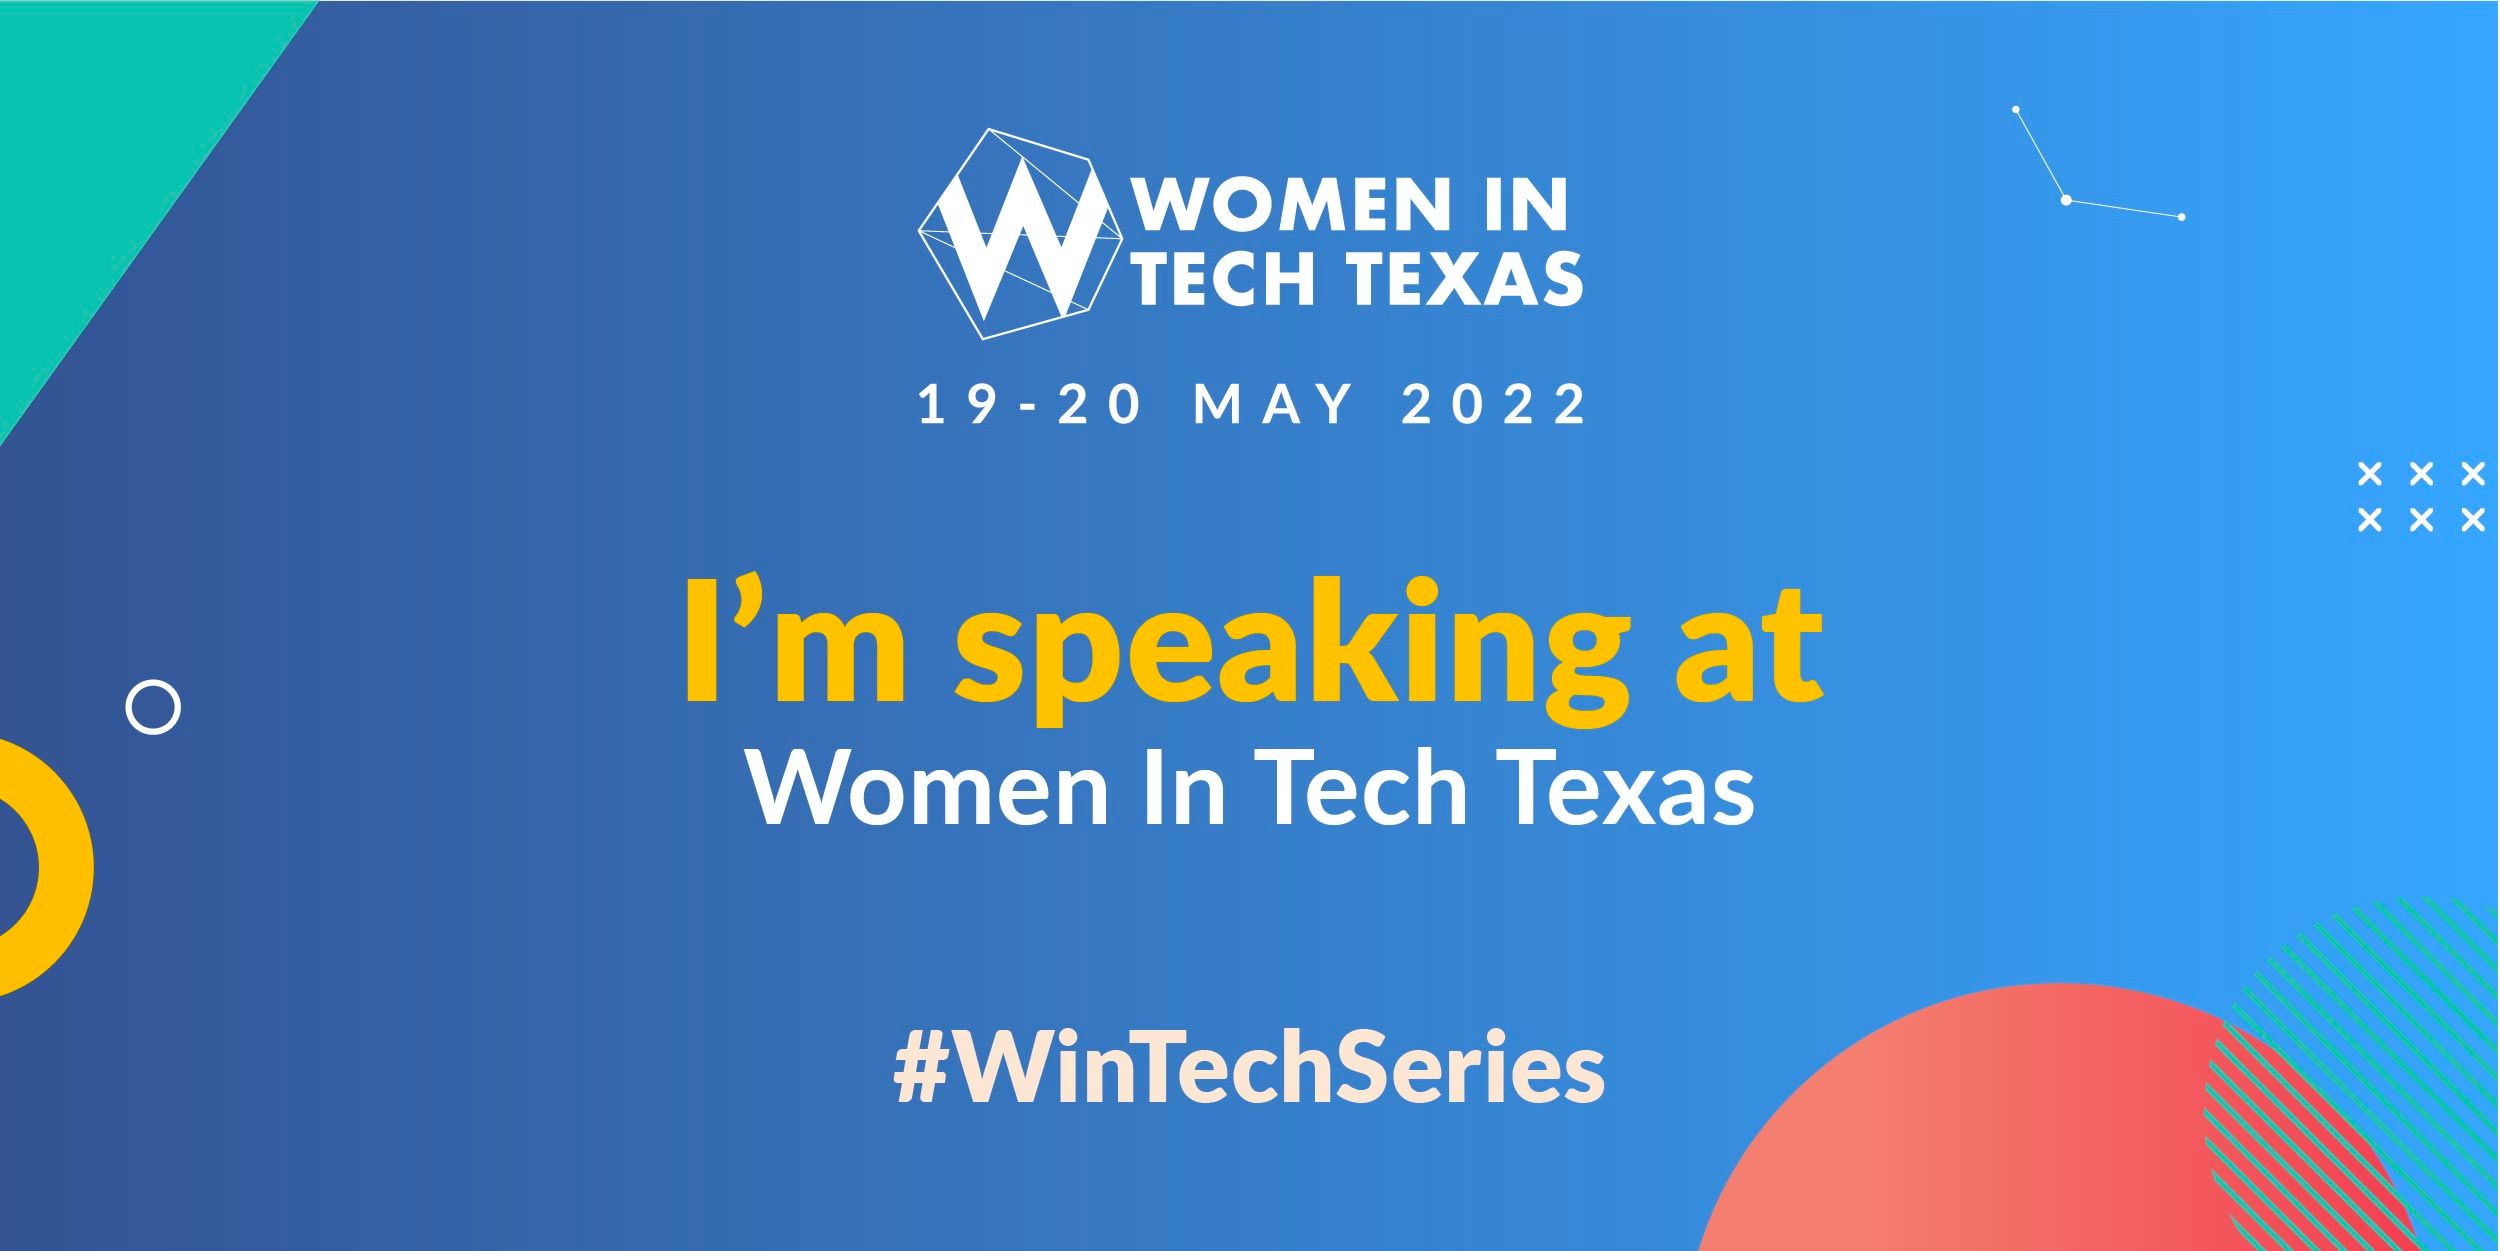 Women in Tech Texas May 19-20, 2022 "I'm speaking" announcement